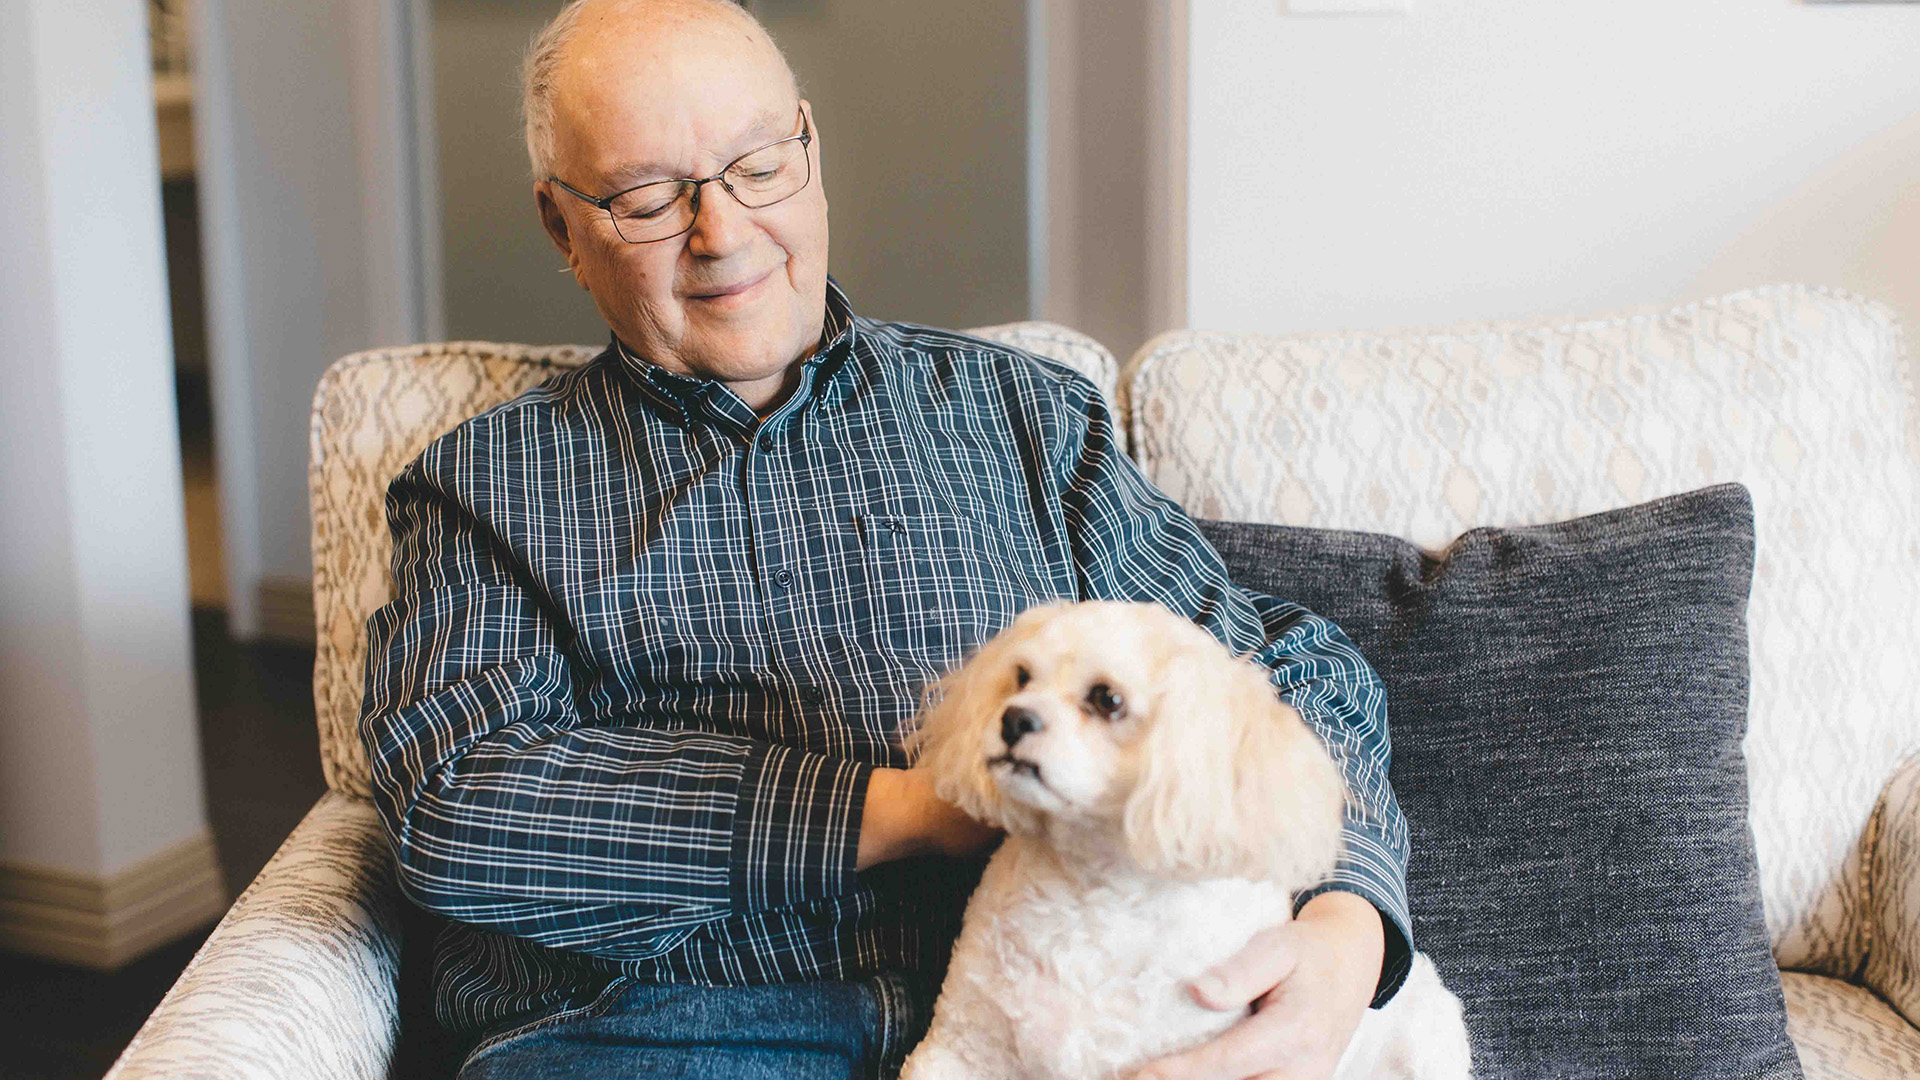 Header image of a senior smiling while holding his dog.